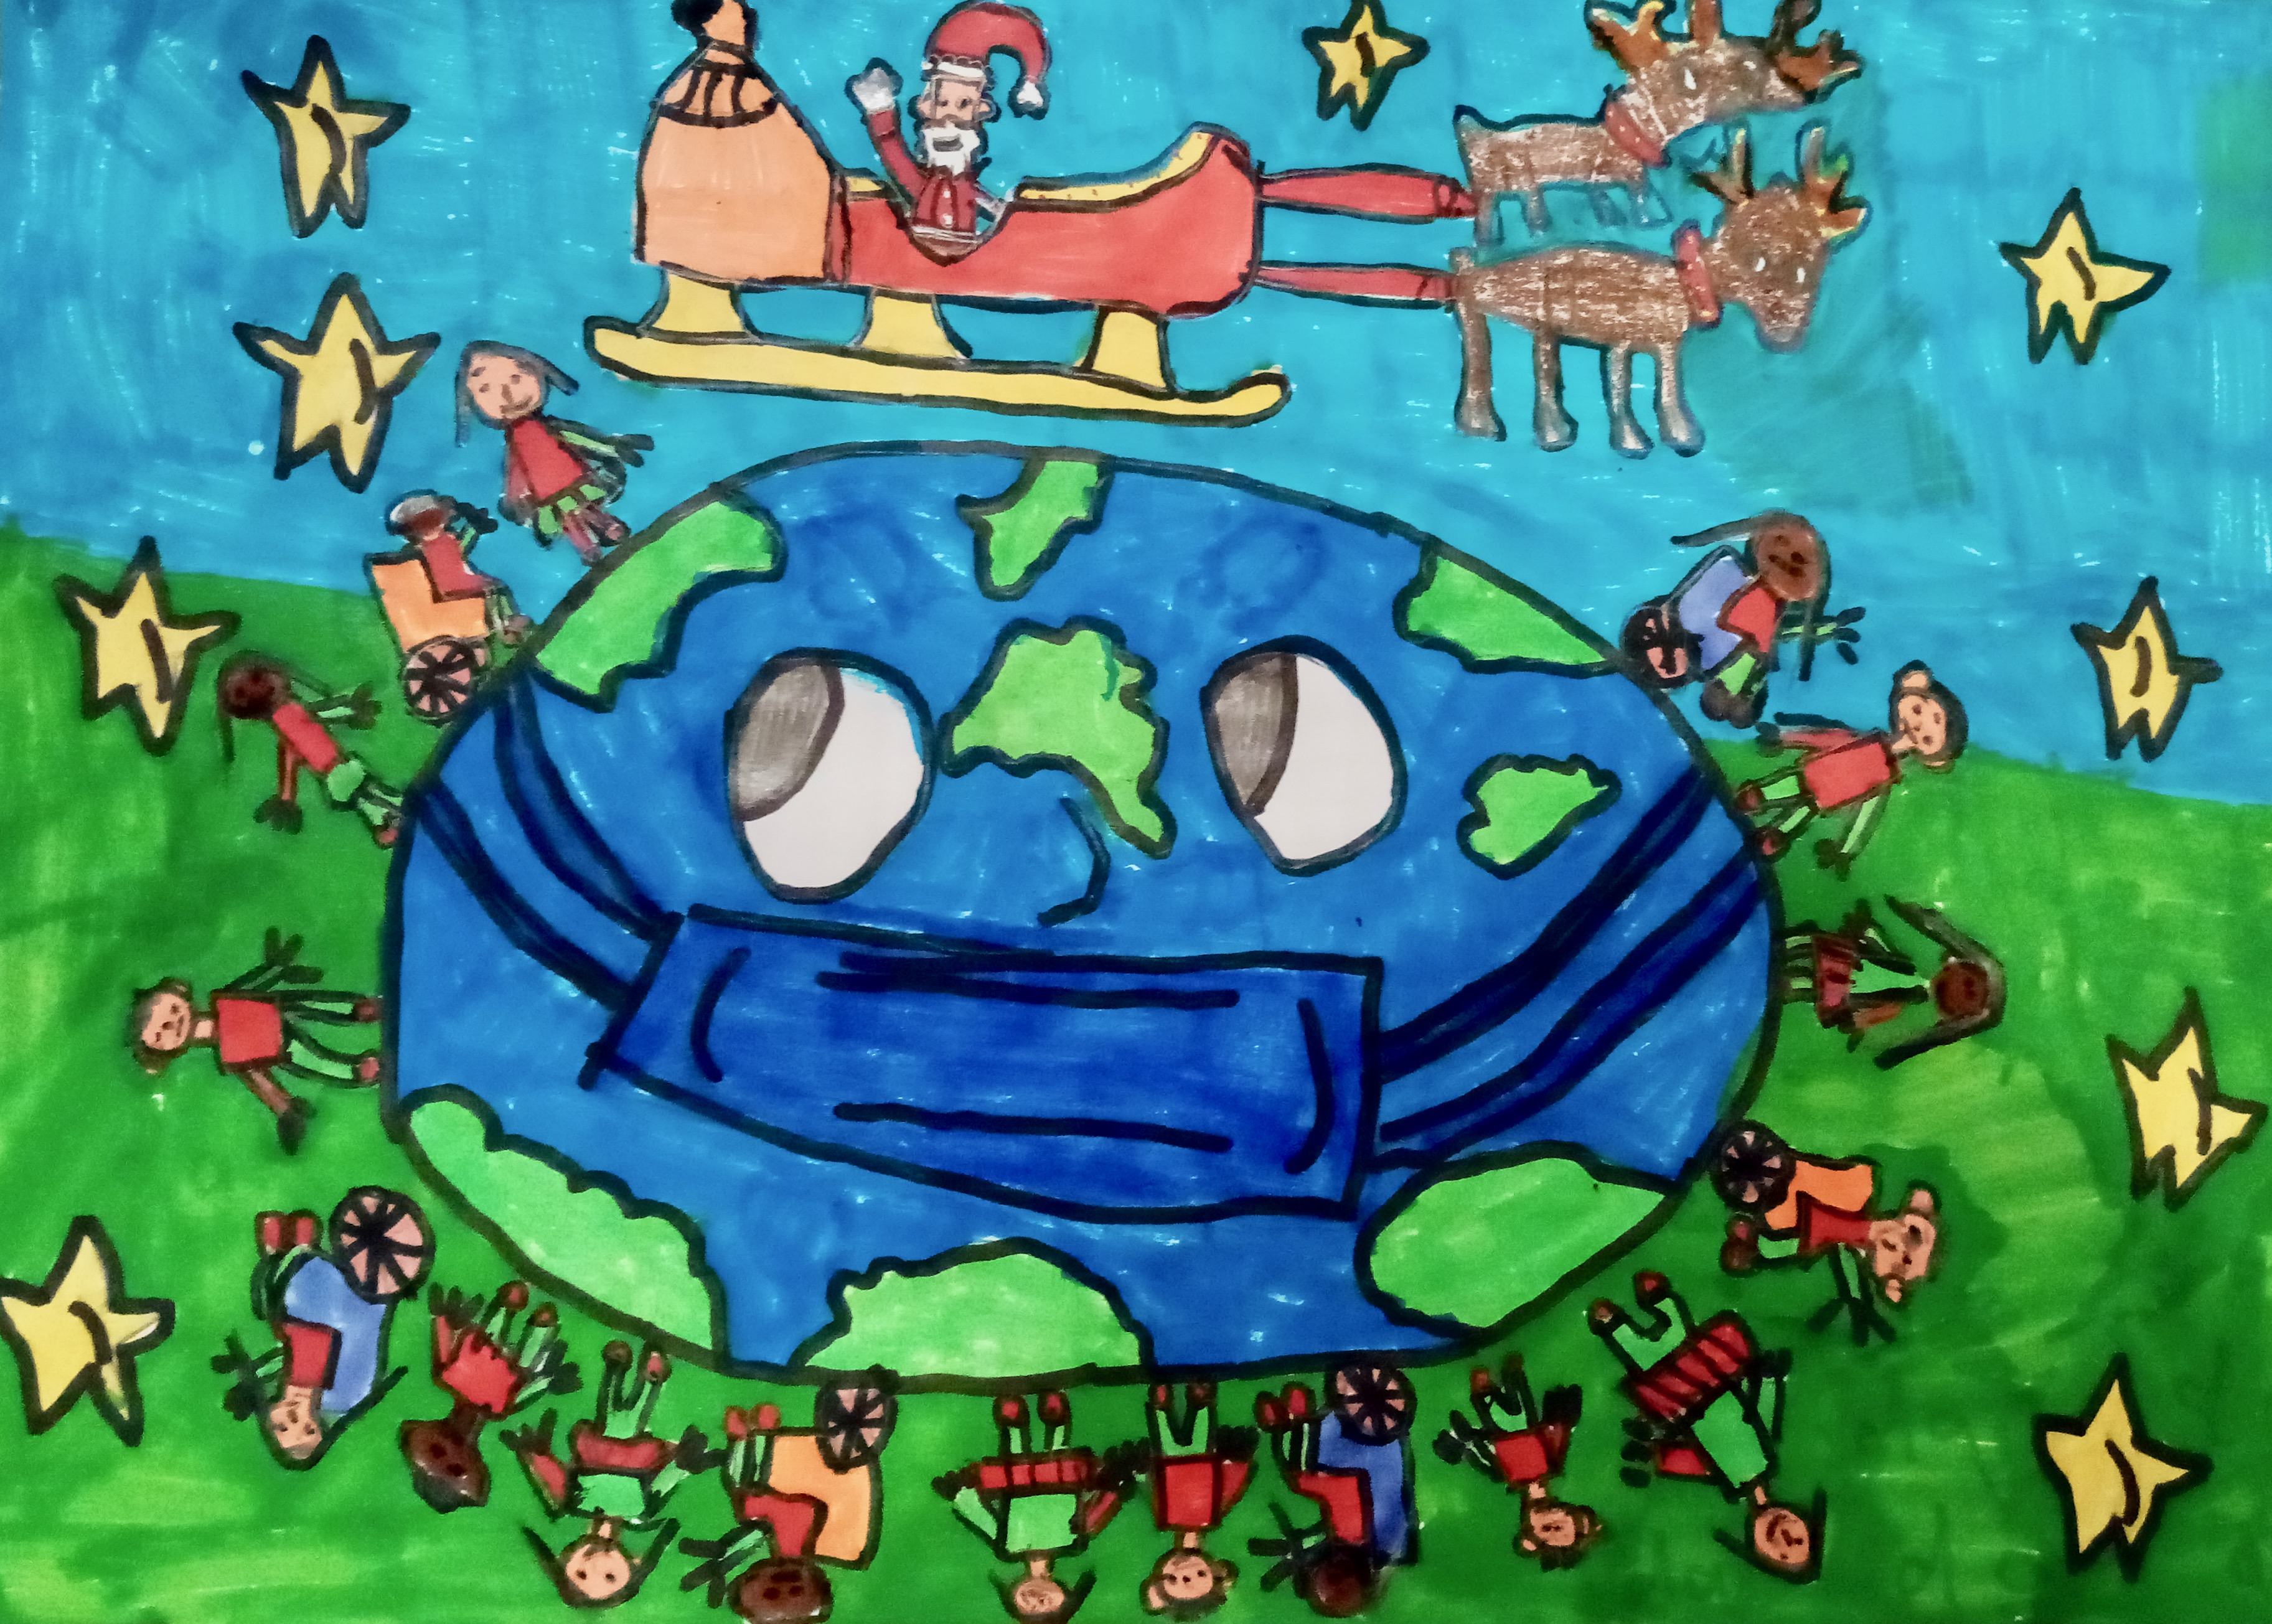 'Santa Unites Us All.' by Mike (9) from Louth